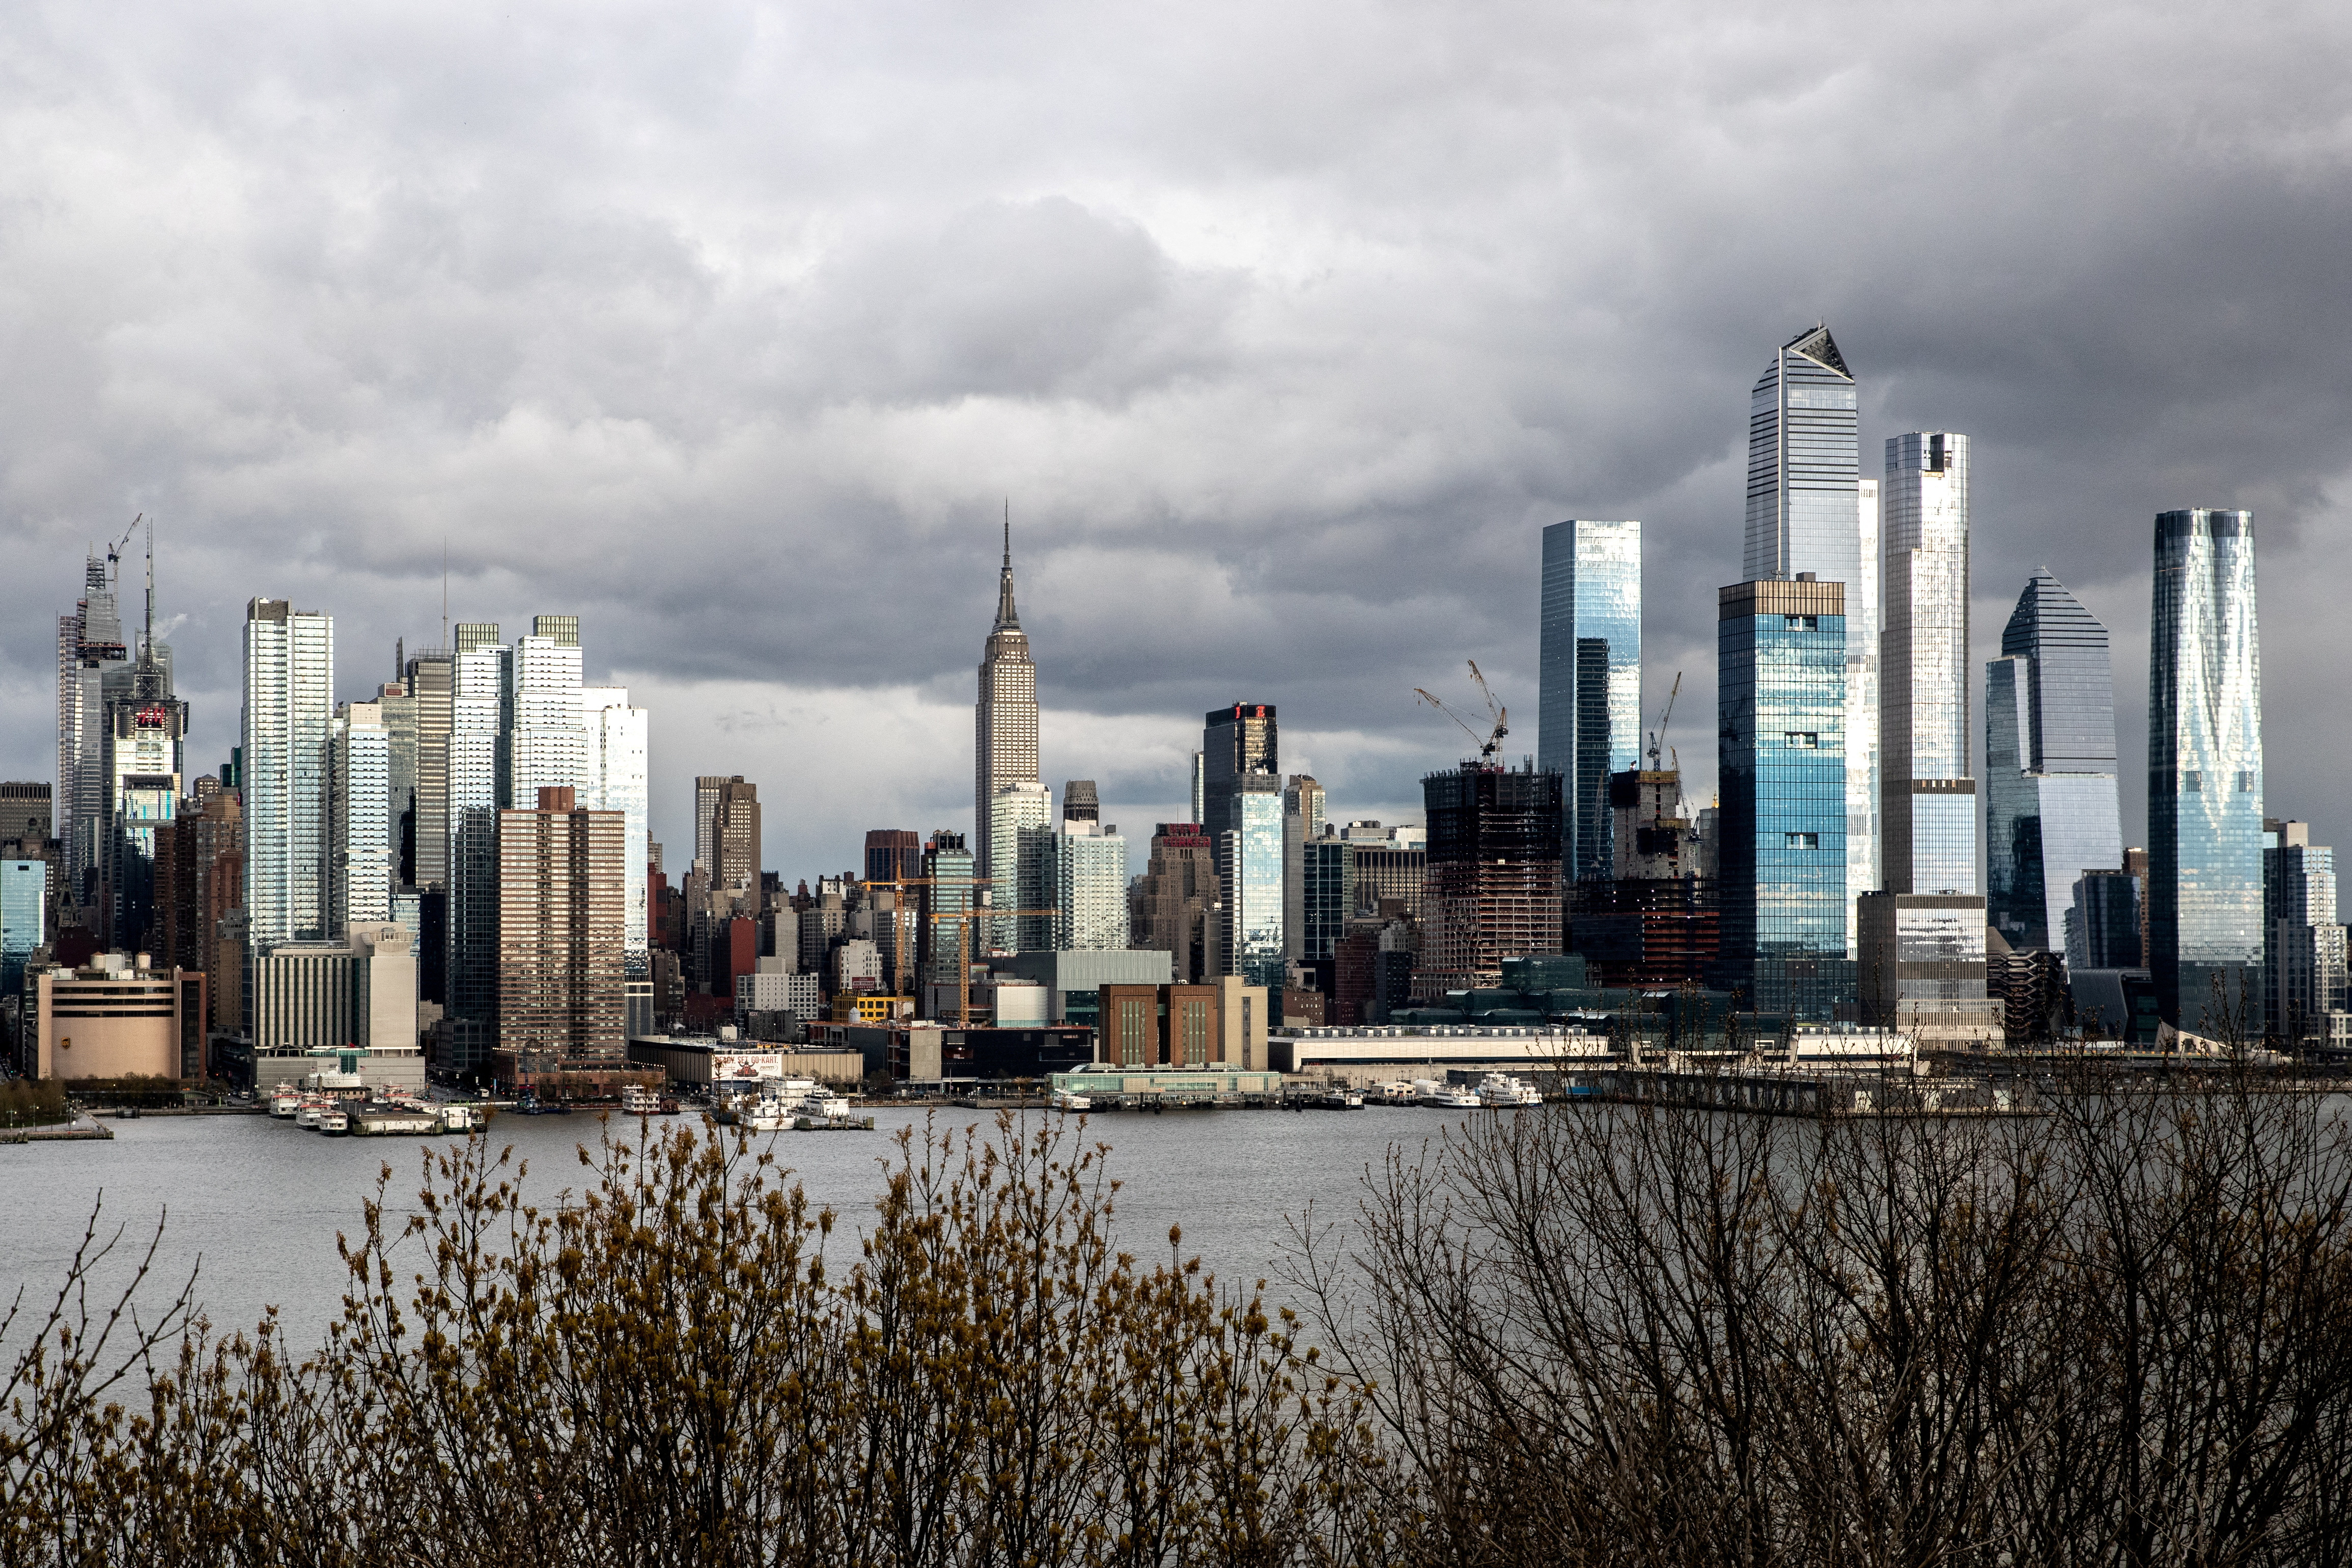 FILE PHOTO: A view of Manhattan and the Hudson River during the outbreak of the coronavirus disease (COVID-19) in New York City as seen from Weehawken